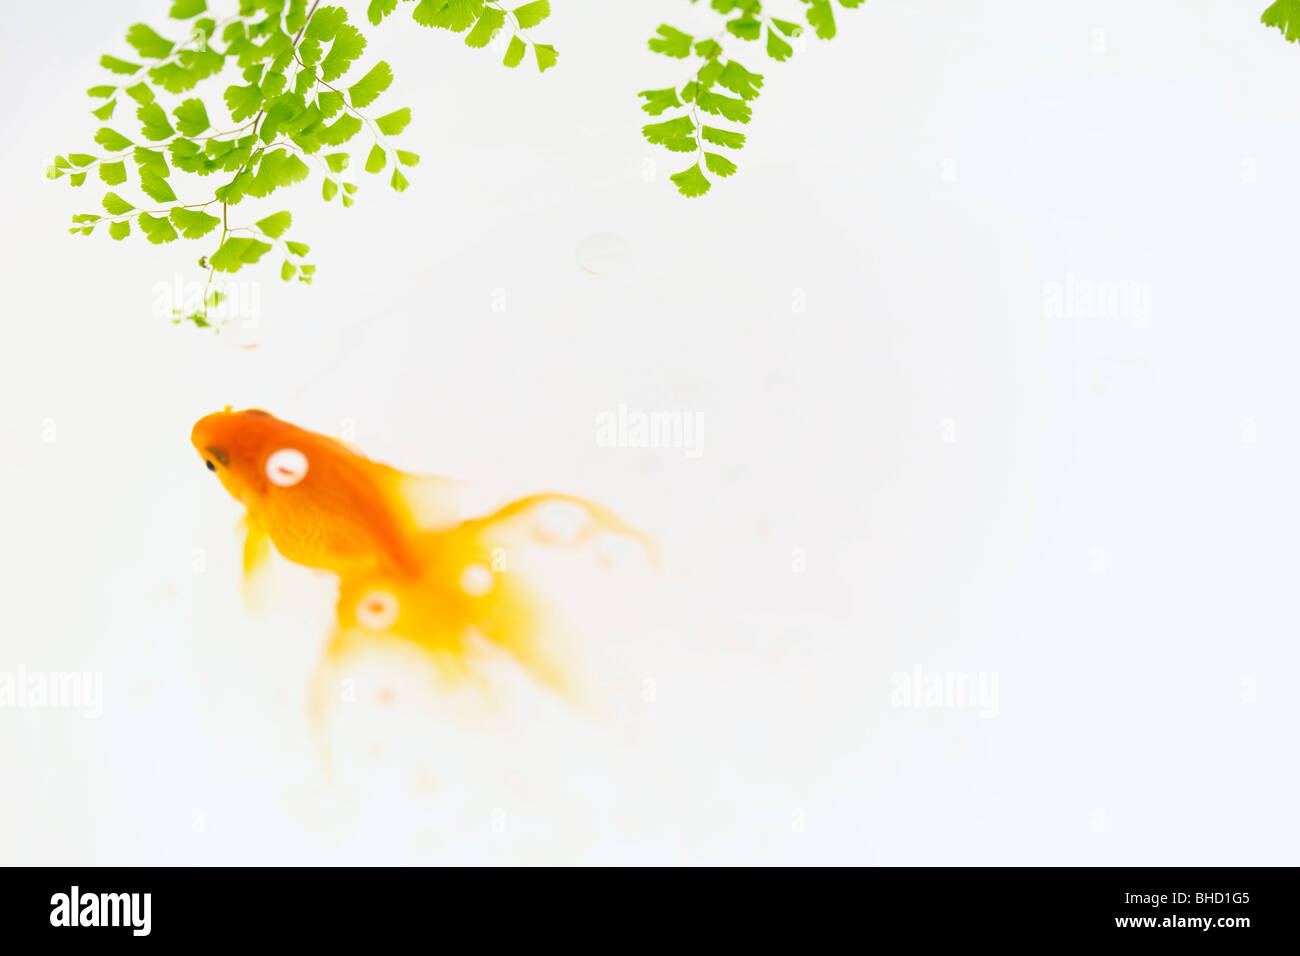 Digital composite of goldfish and leafy branches Stock Photo